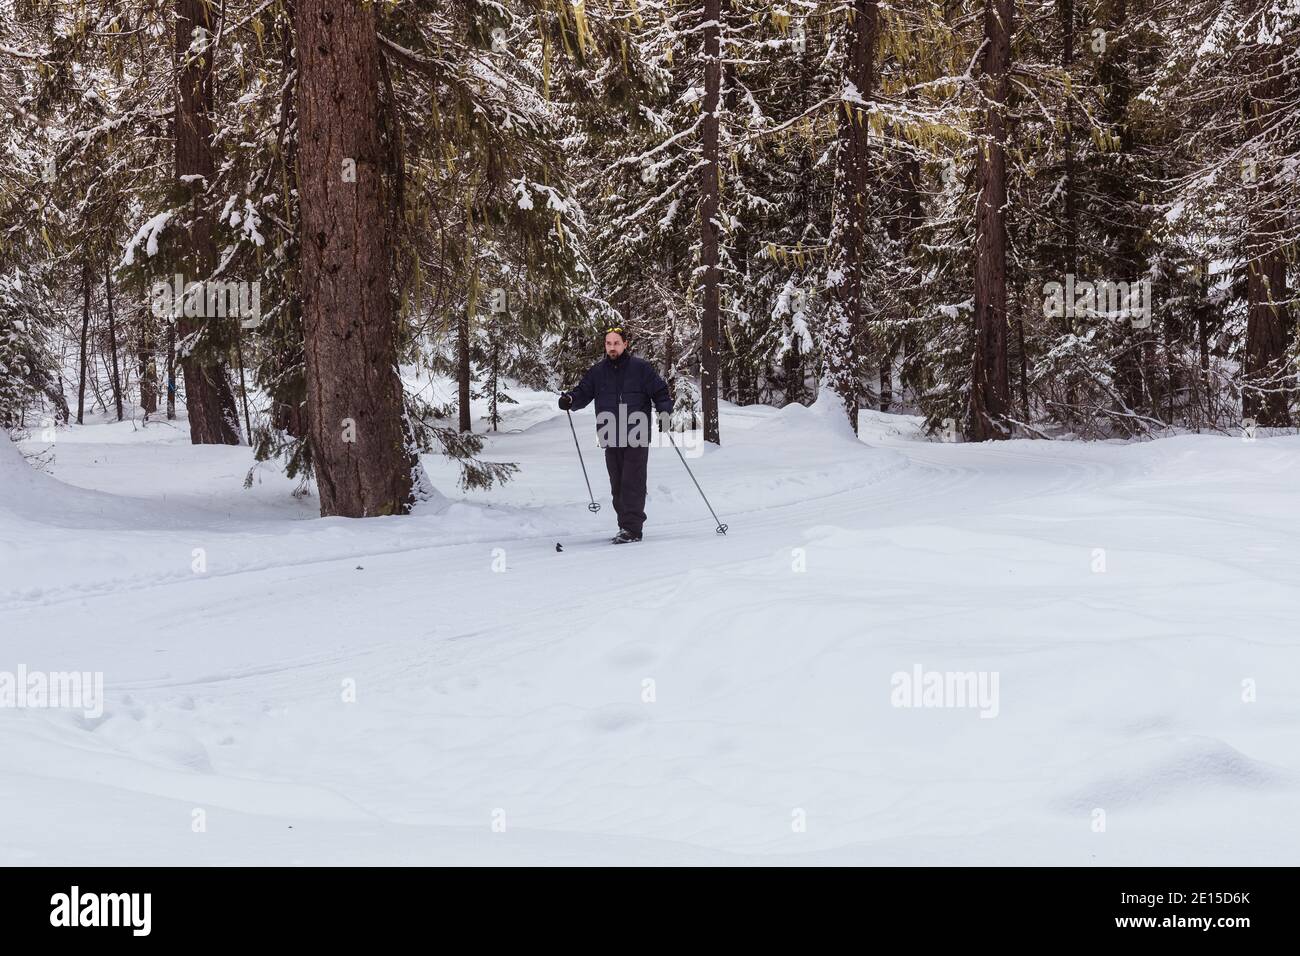 Man Cross-Country Skiing on Groomed Track in Forest Stock Photo